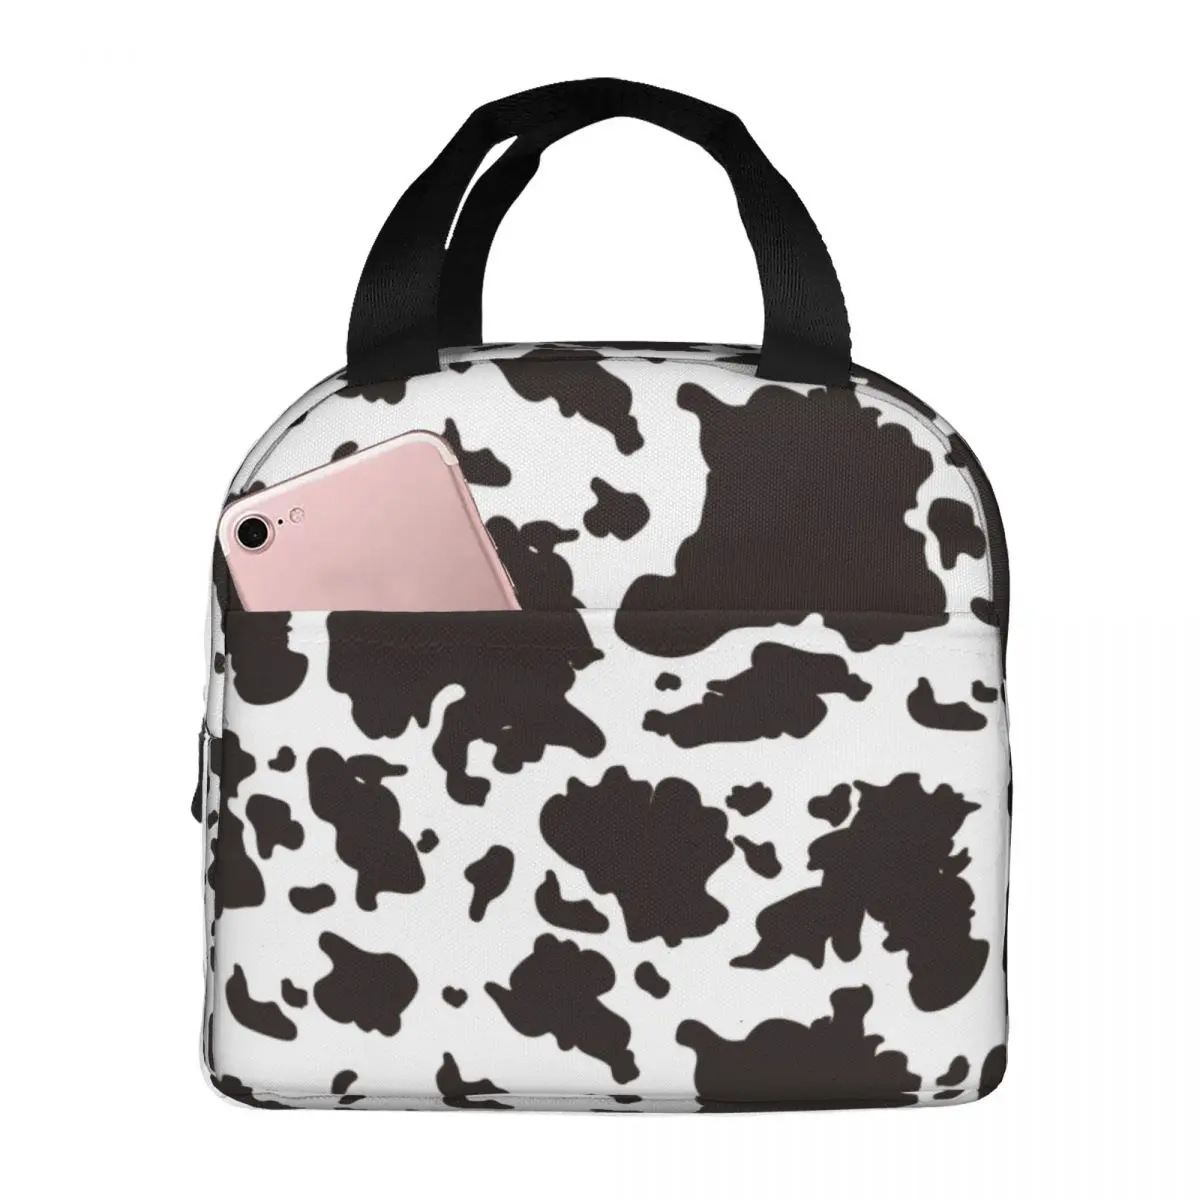 Lunch Bags for Men Women Cow Pattern Insulated Cooler Bag Portable Picnic Work Animal Oxford Tote Food Bag